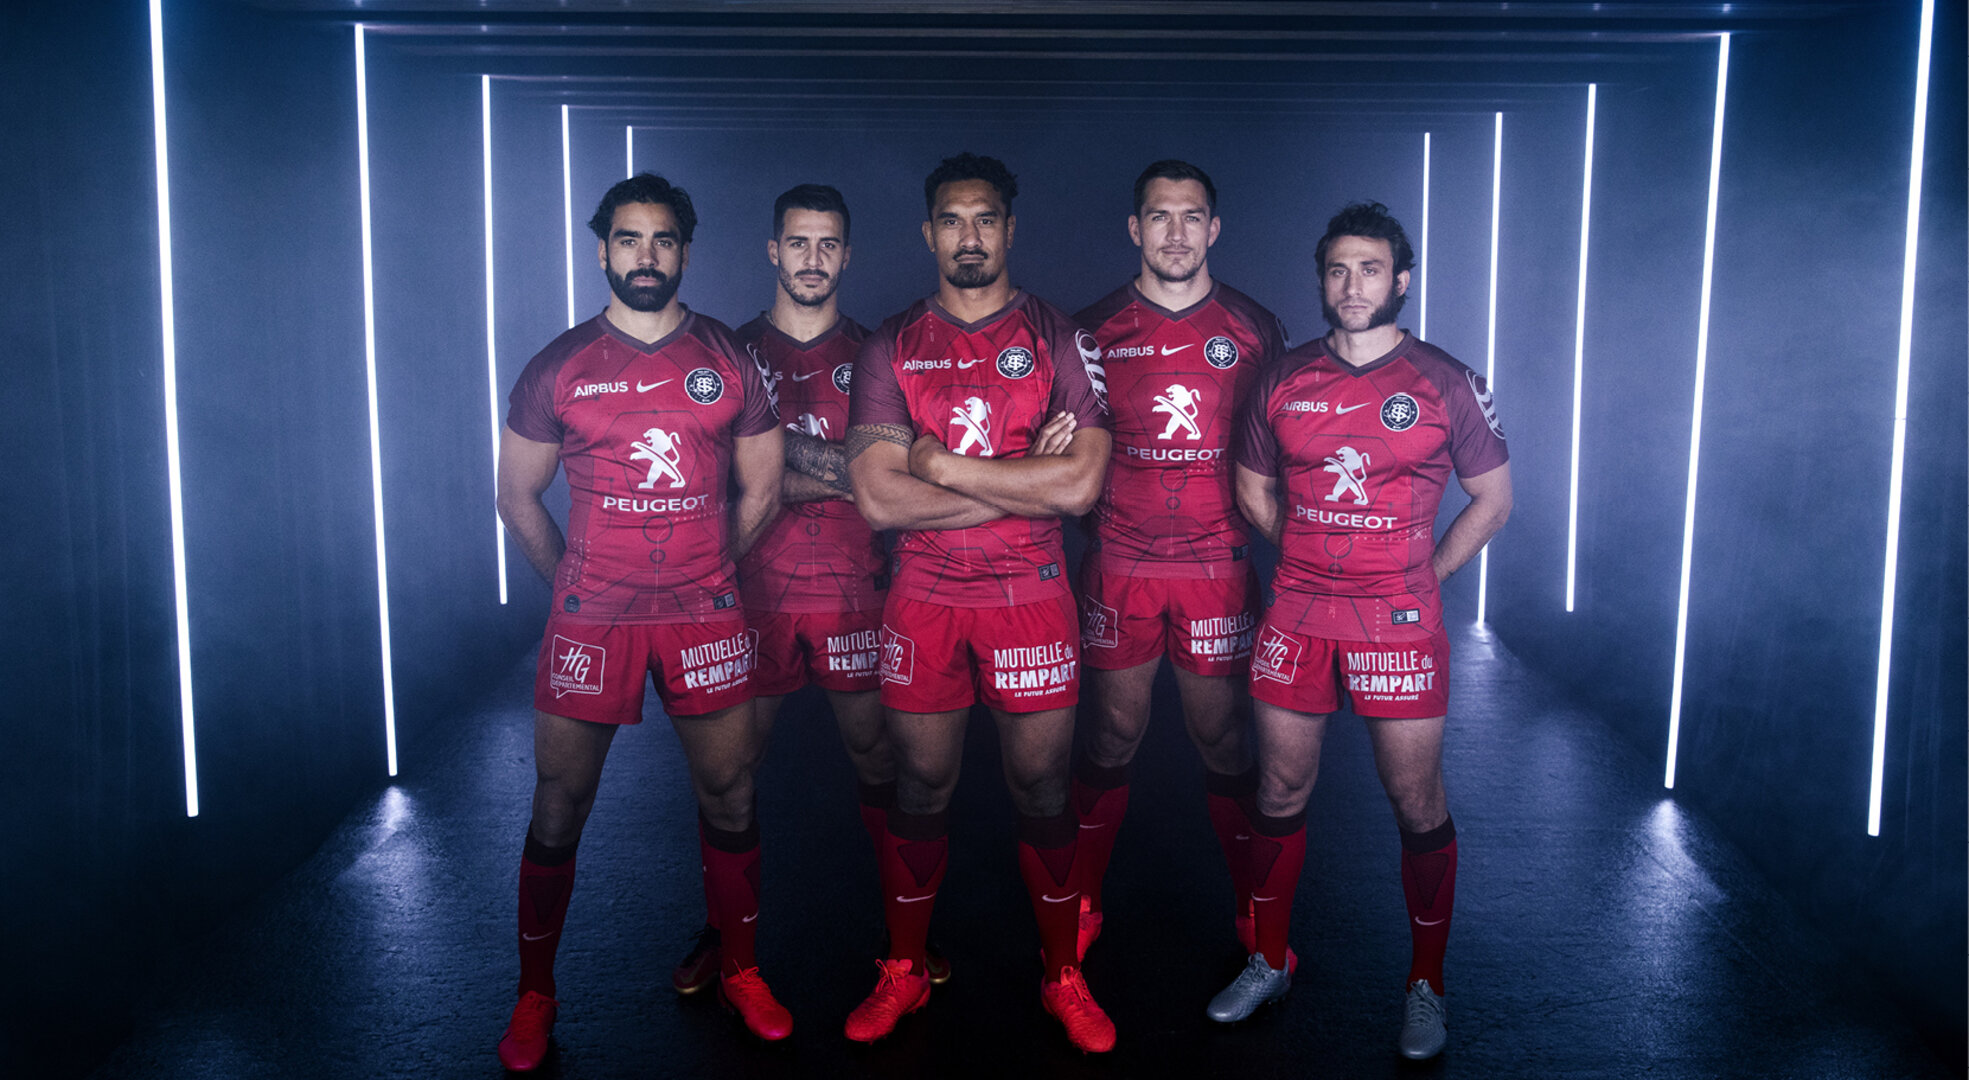 2020-21 kit of the Stade Toulousain rugby team 